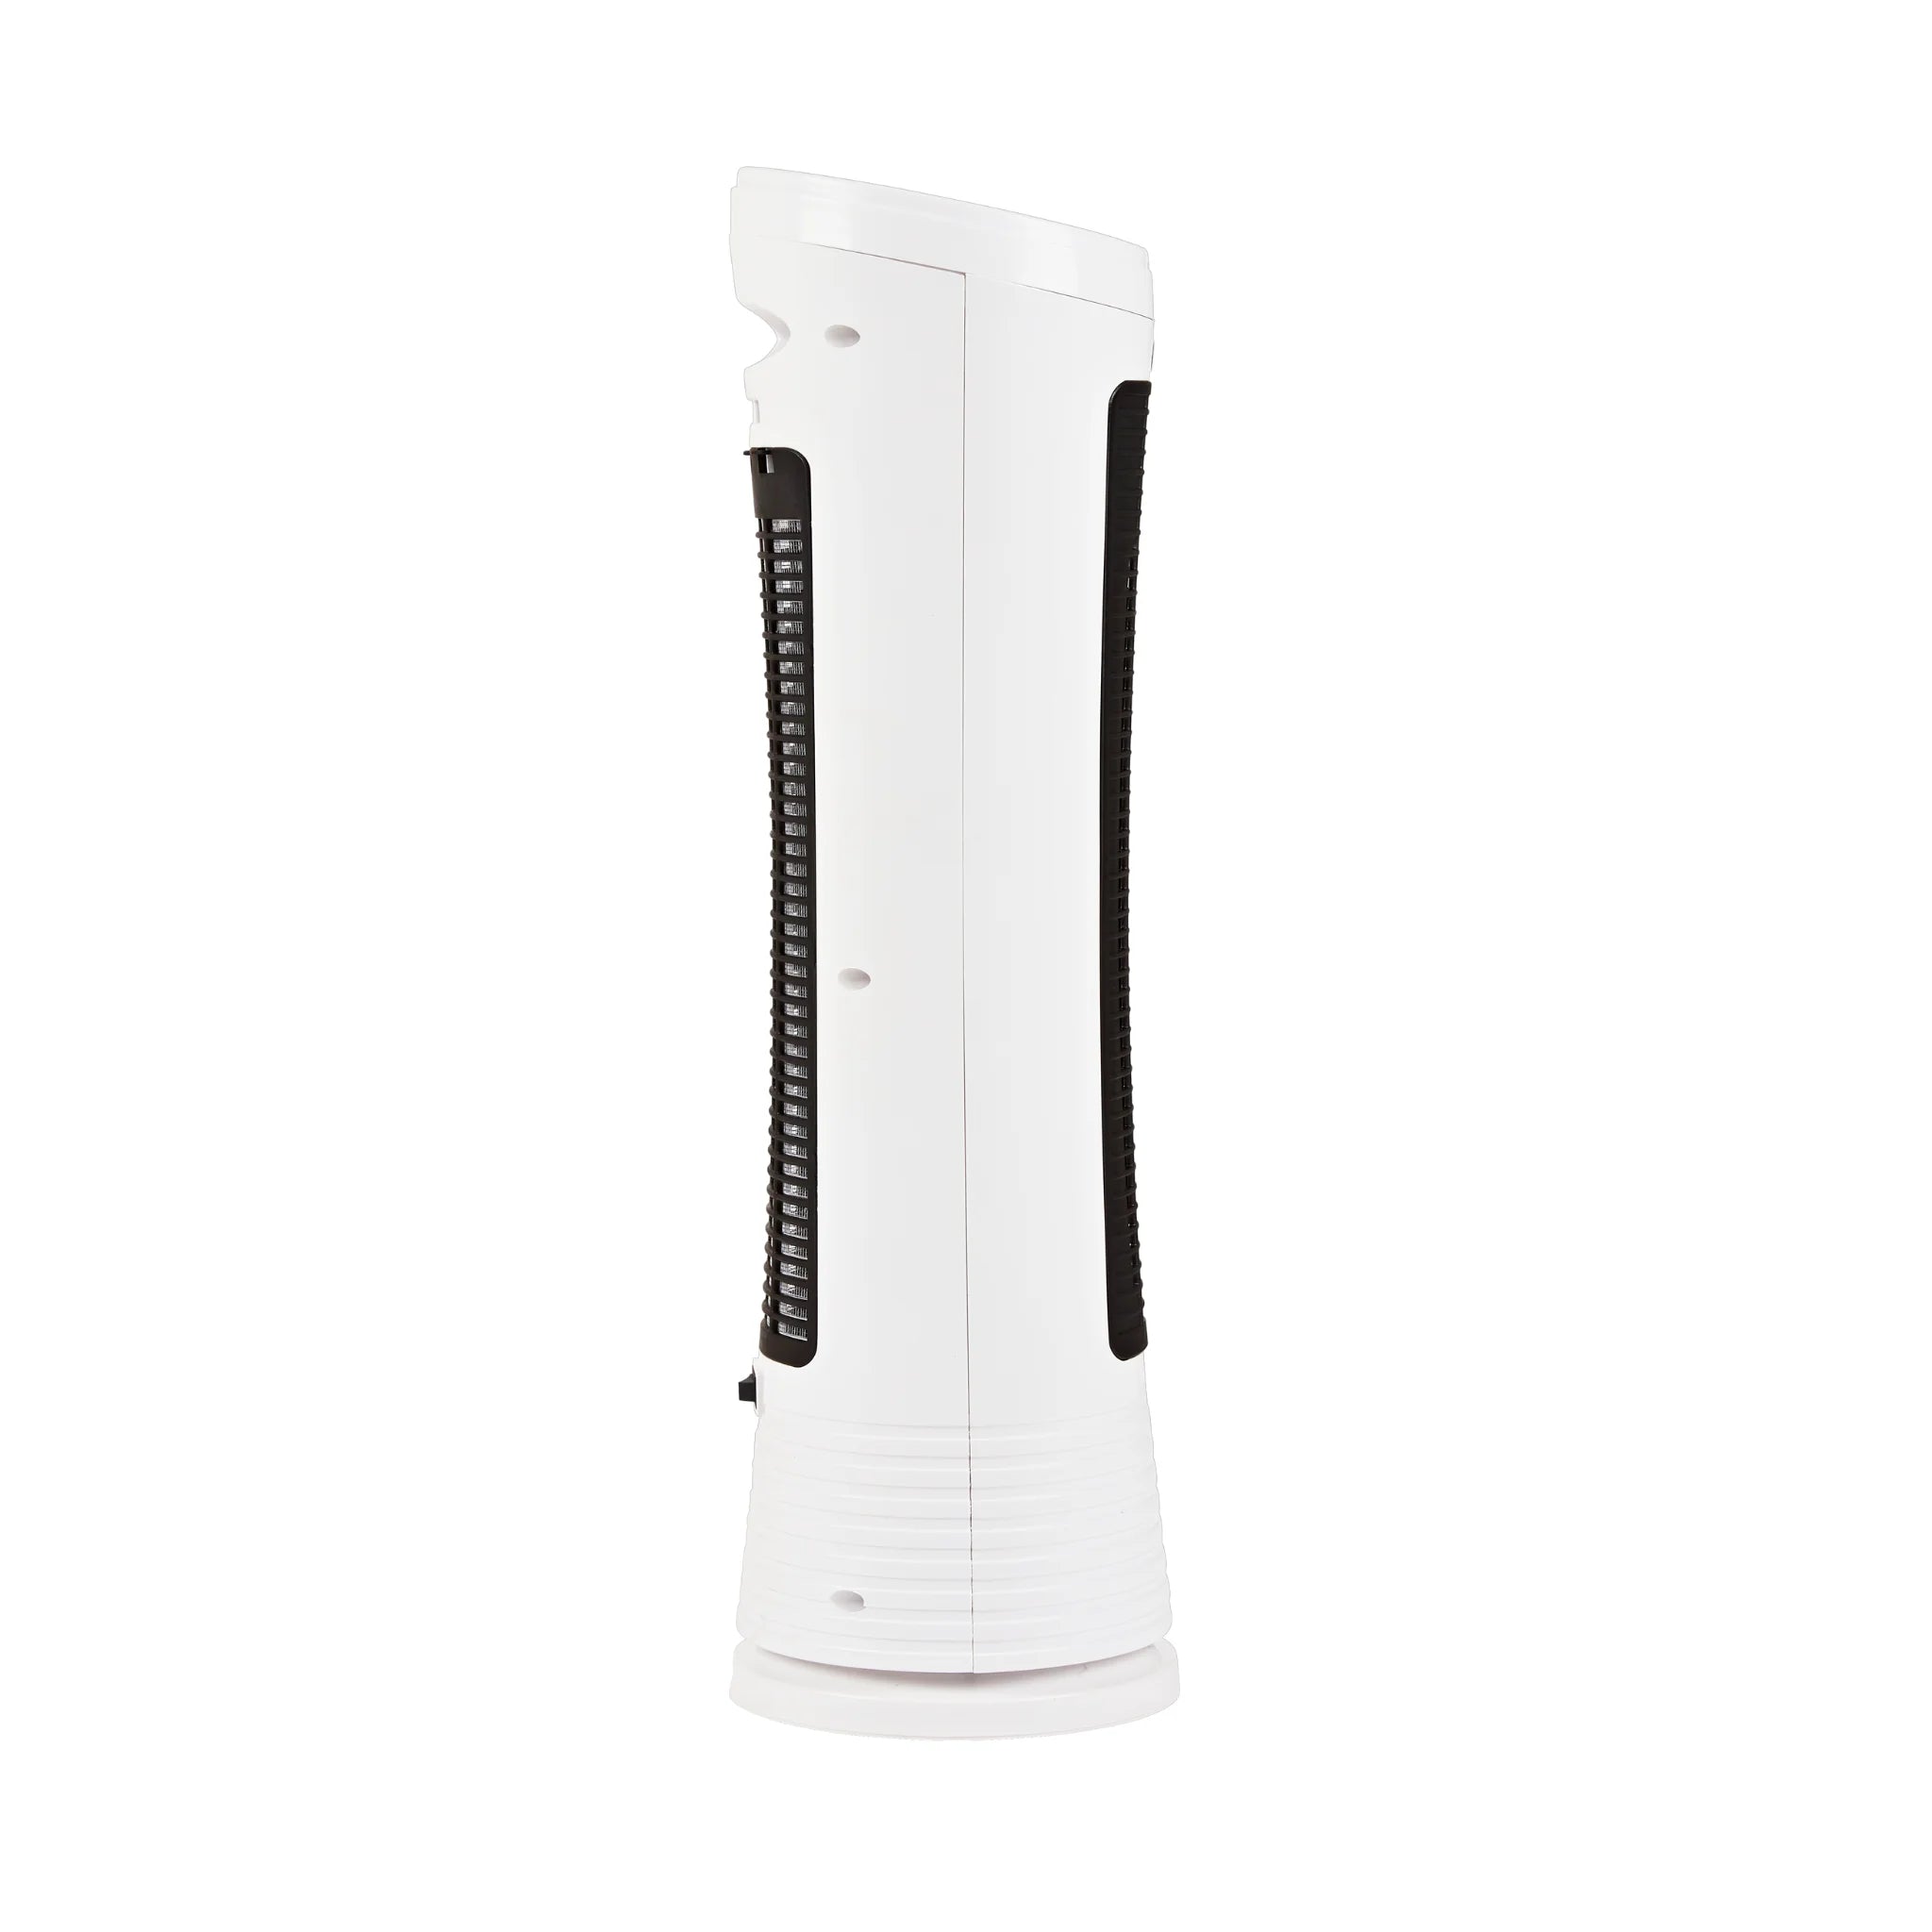 A Senelux 2000W Tower Heater with a slim, white design and portable carry handle pictured in a side on view.